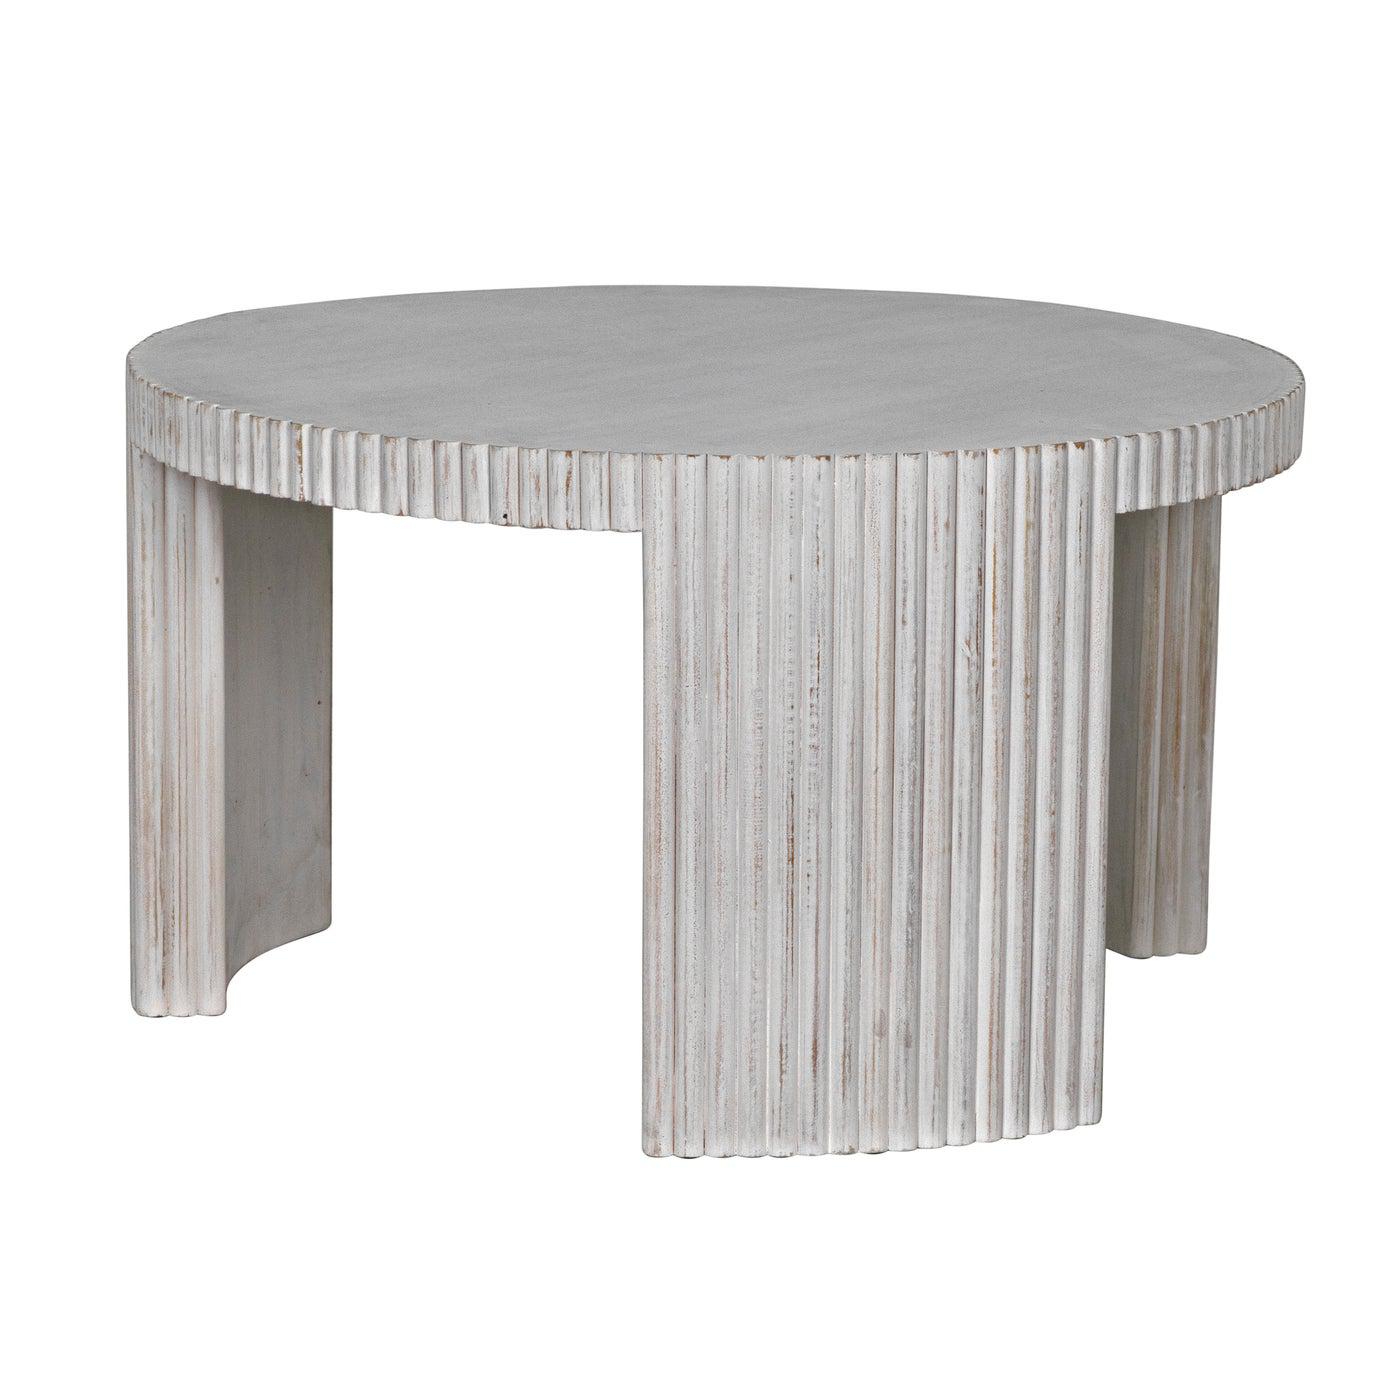 Jgor Side/Coffee Table, White Wash